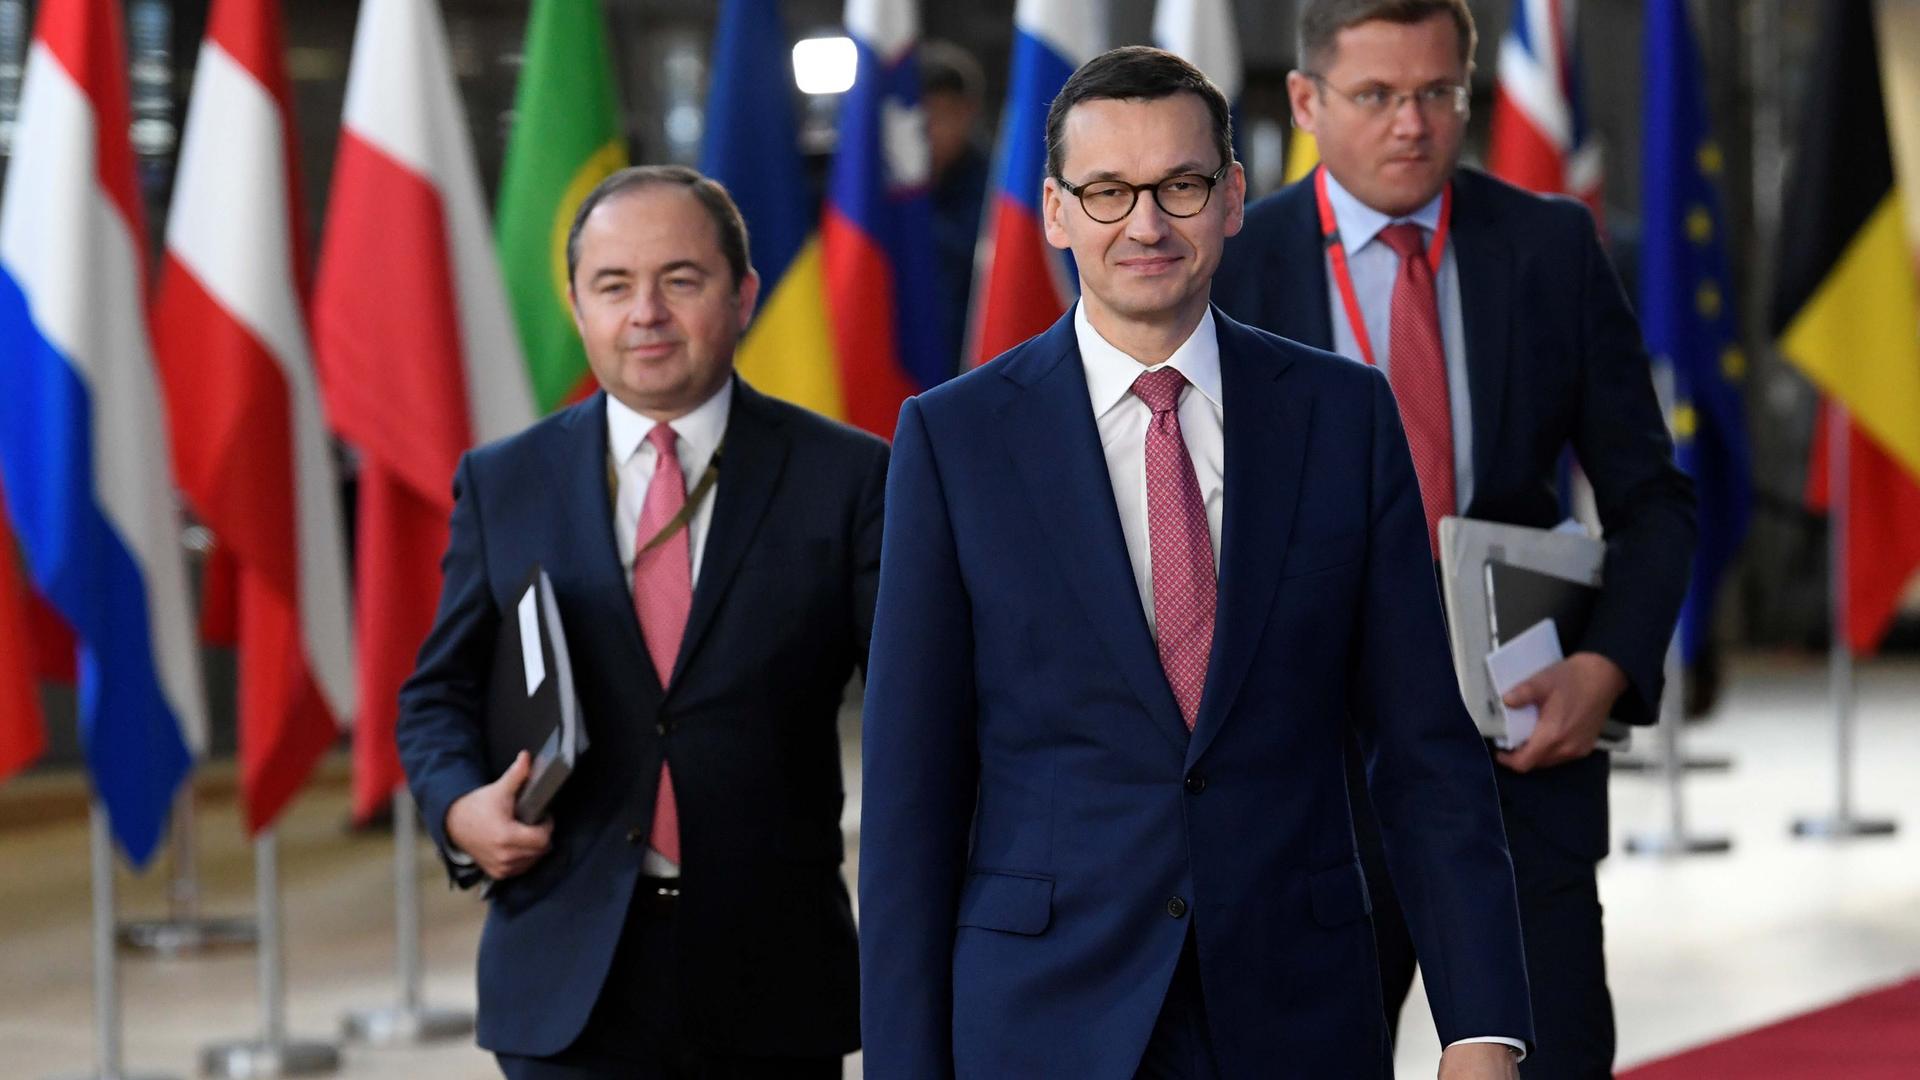 Three men in suits walking in front of flags